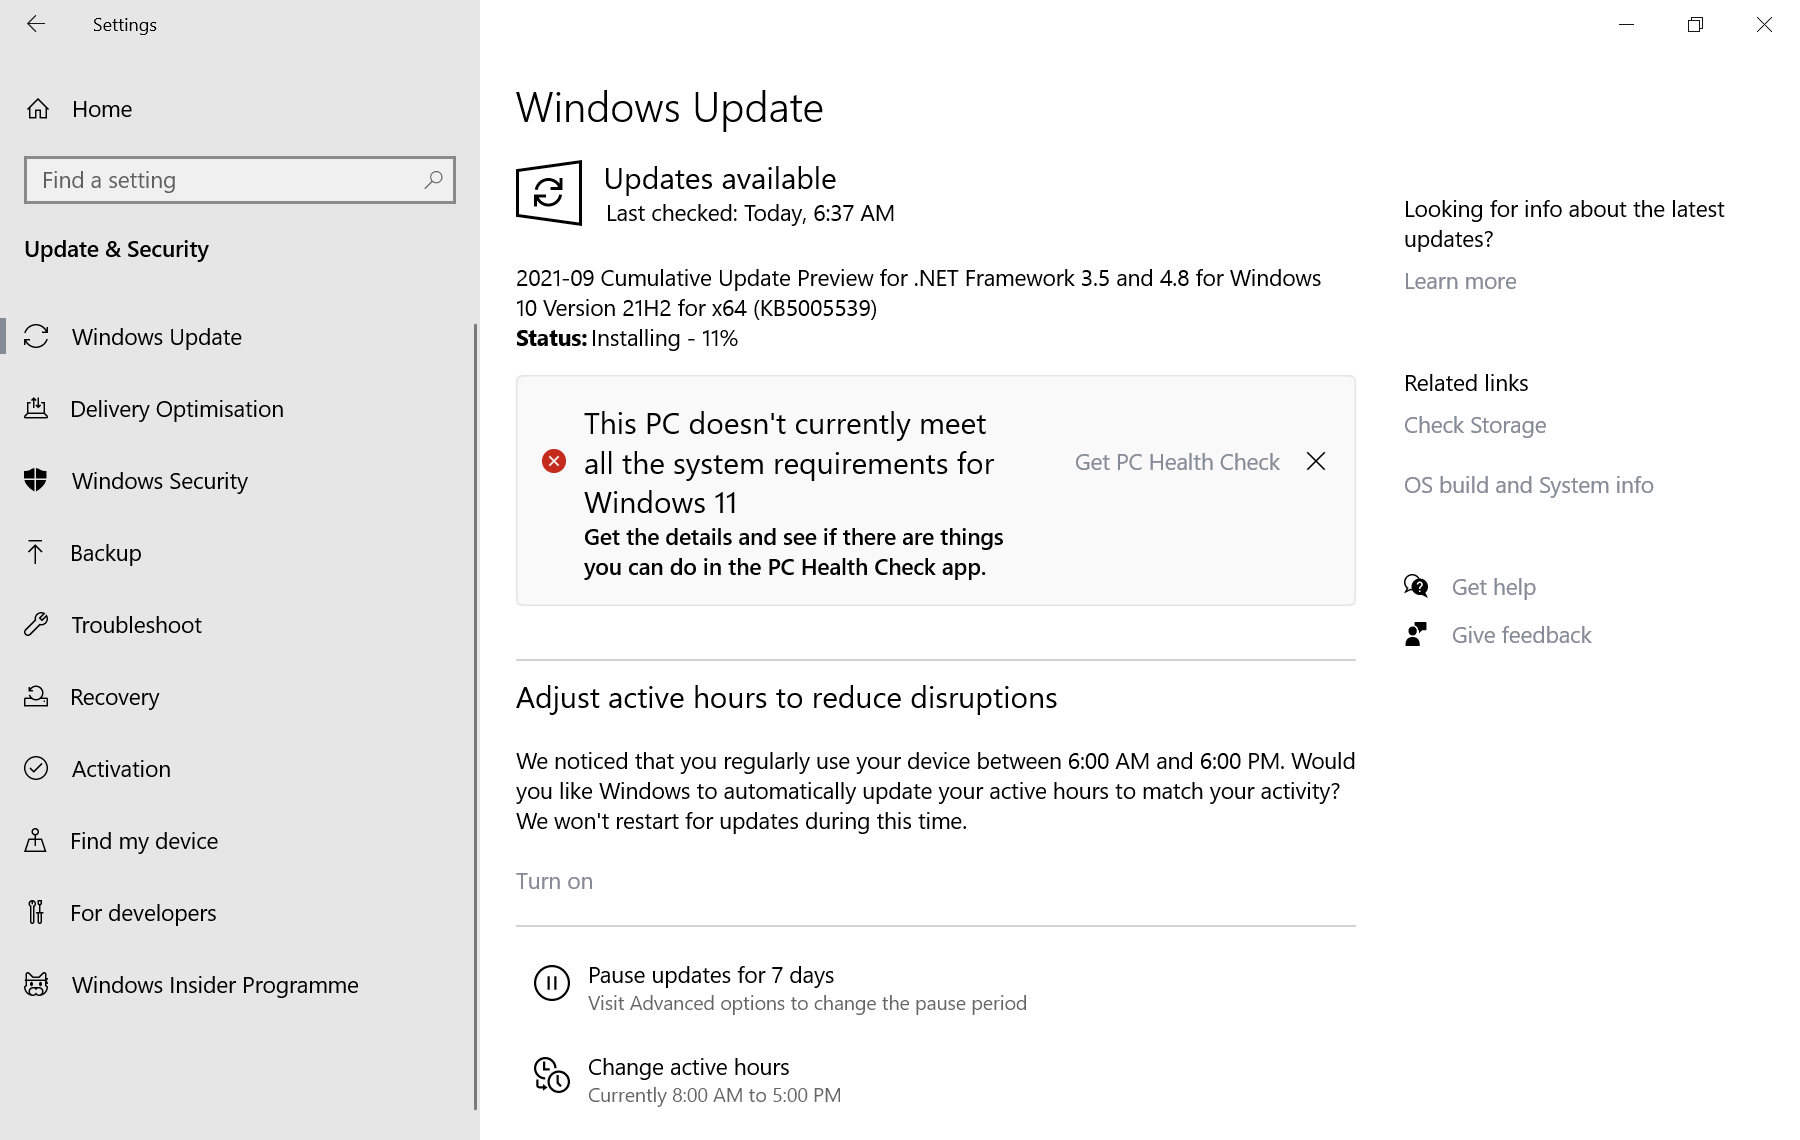 This PC does not currently meet all the system requirements for Windows 11